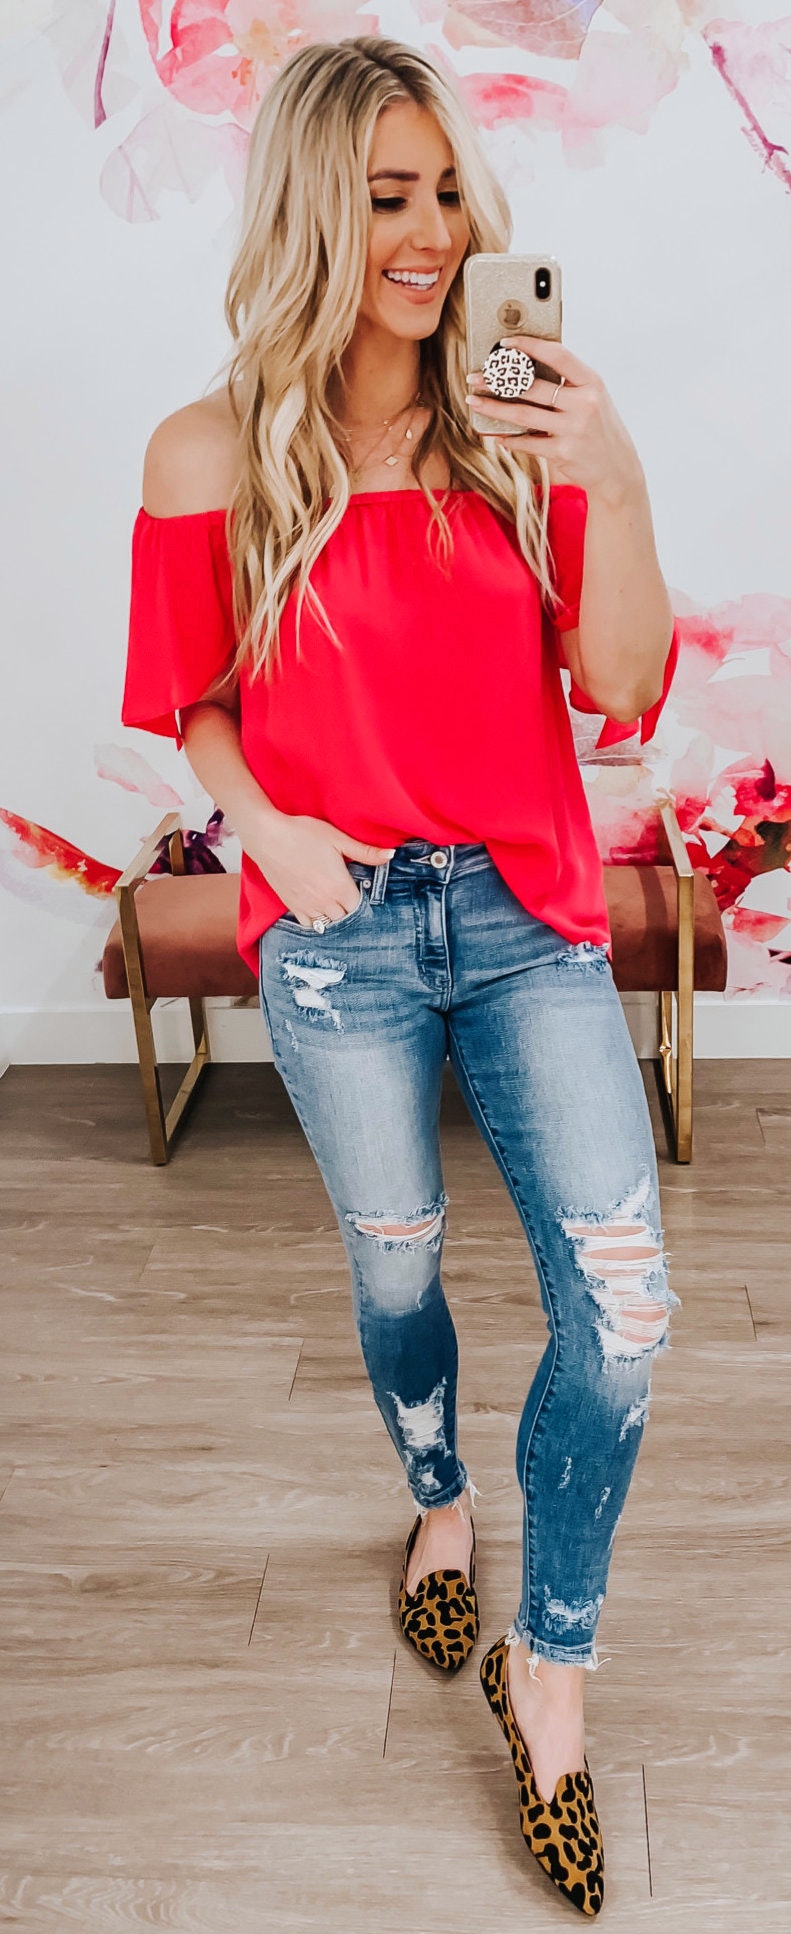 Blue distressed jeans and red off-shoulder top.